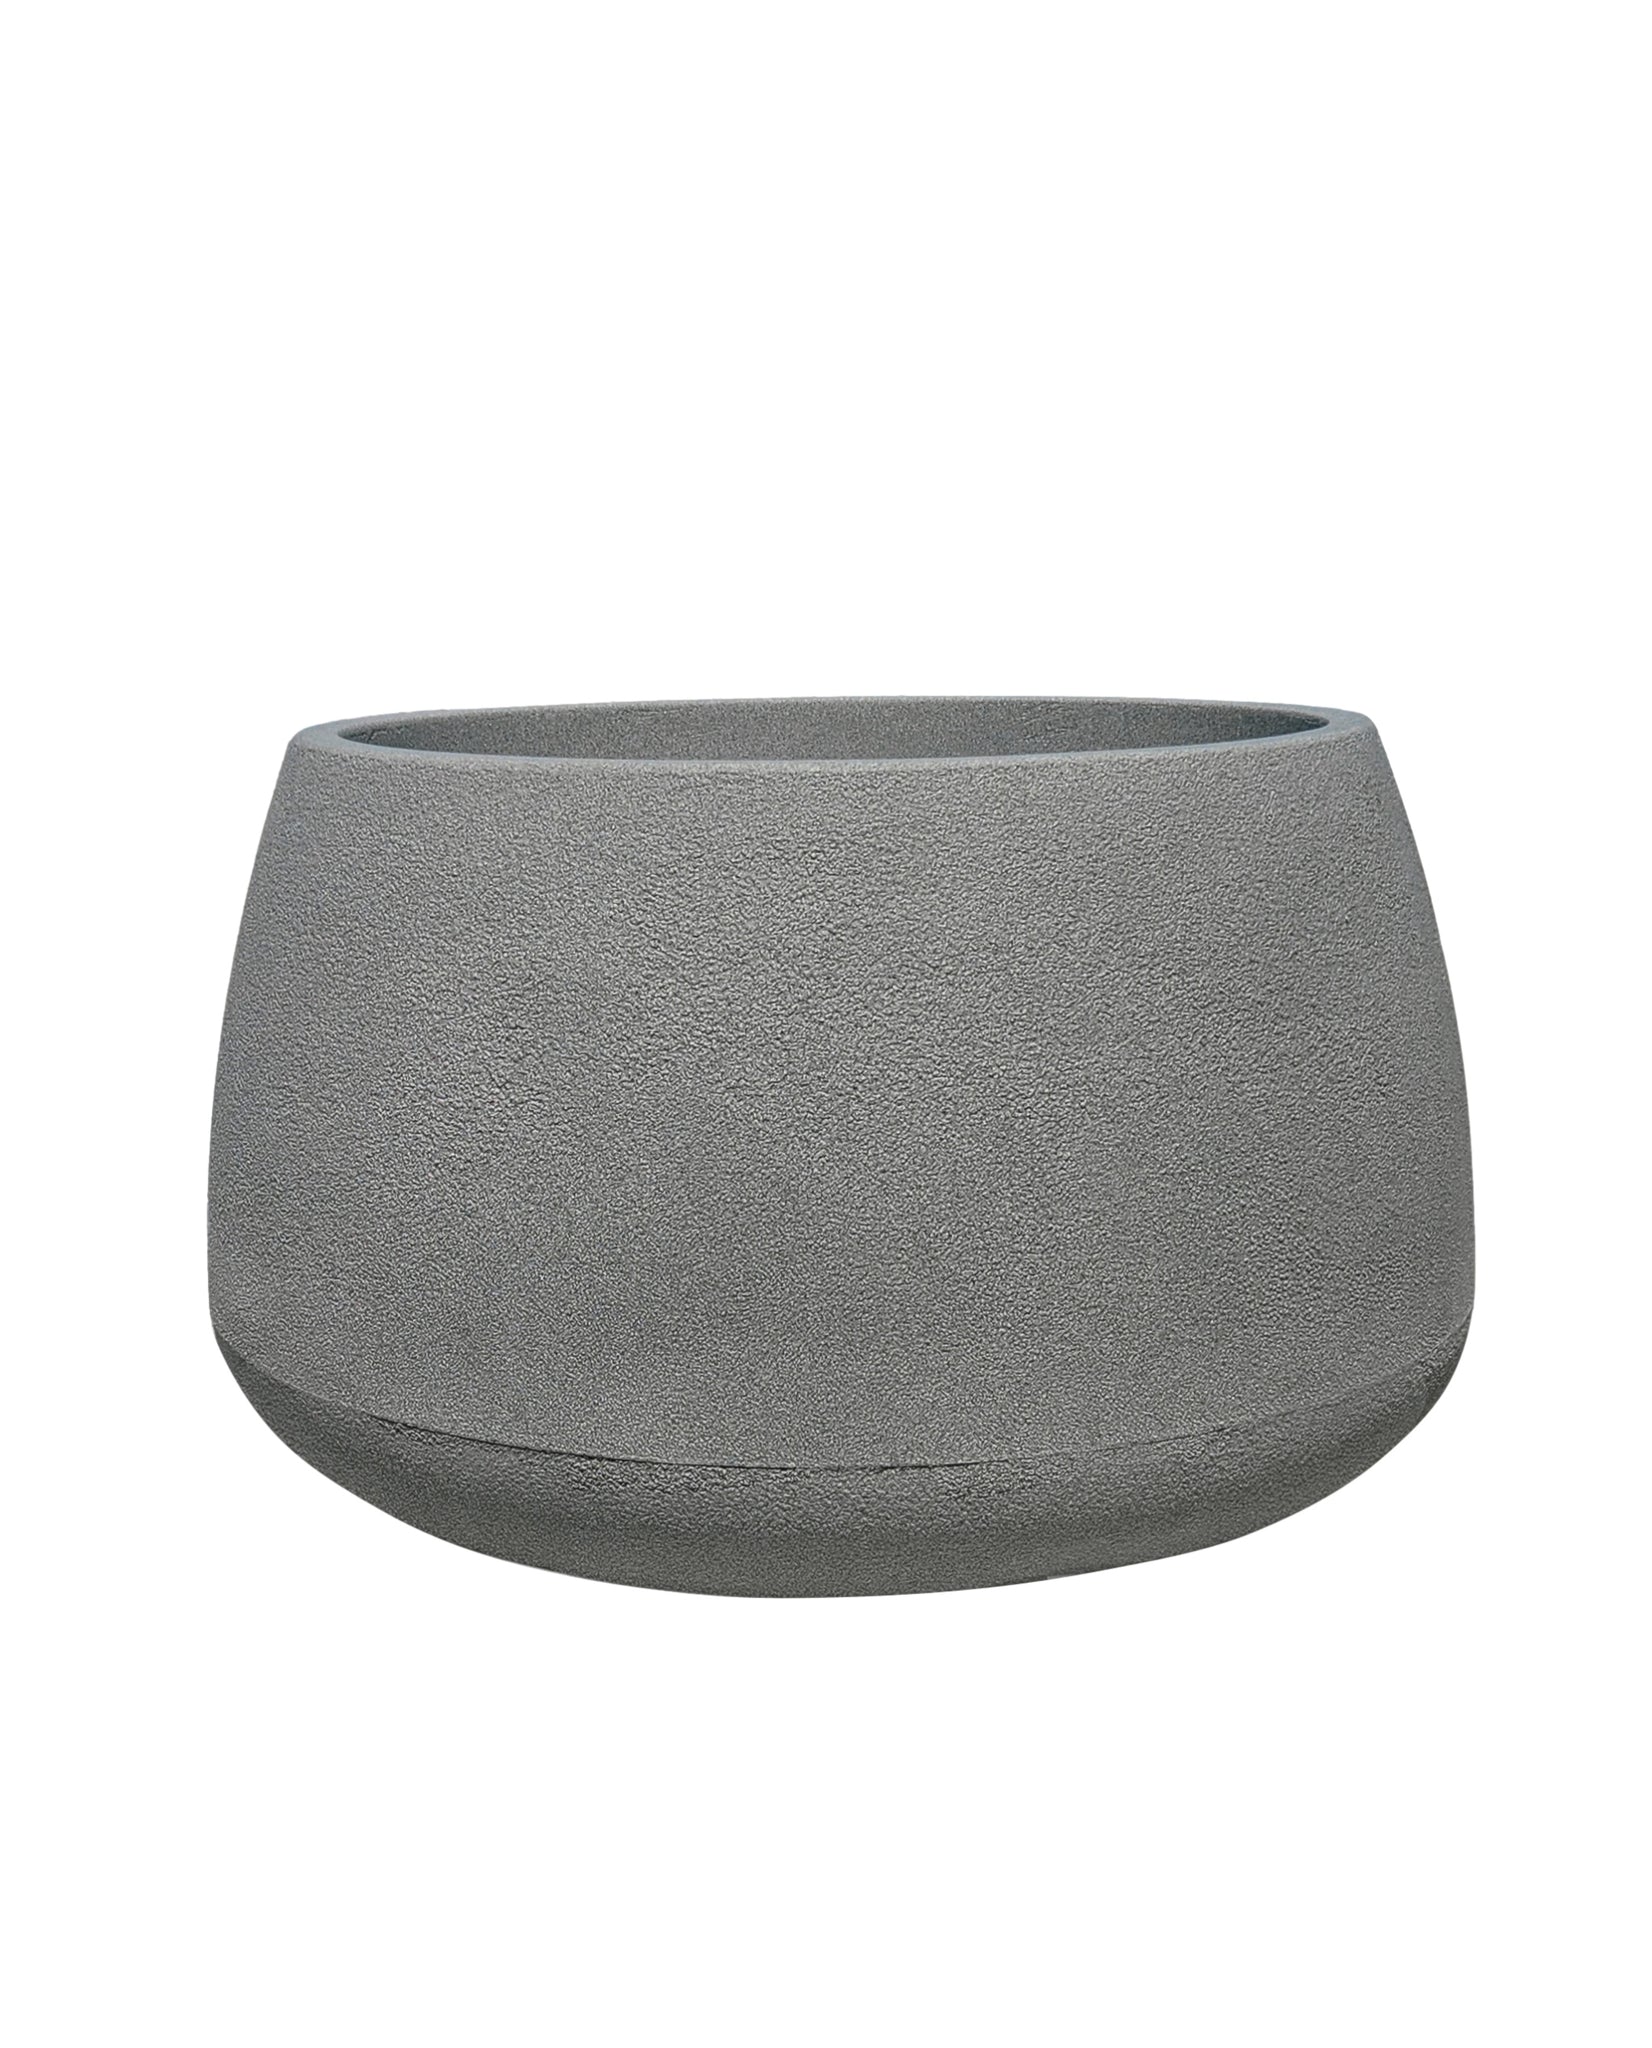 Bios Low Japi Planter. Stone colour, Low rise modern contemporary plant pot with stunning slightly textured finish, and wide neck for planting. Florastyle by Hingham.